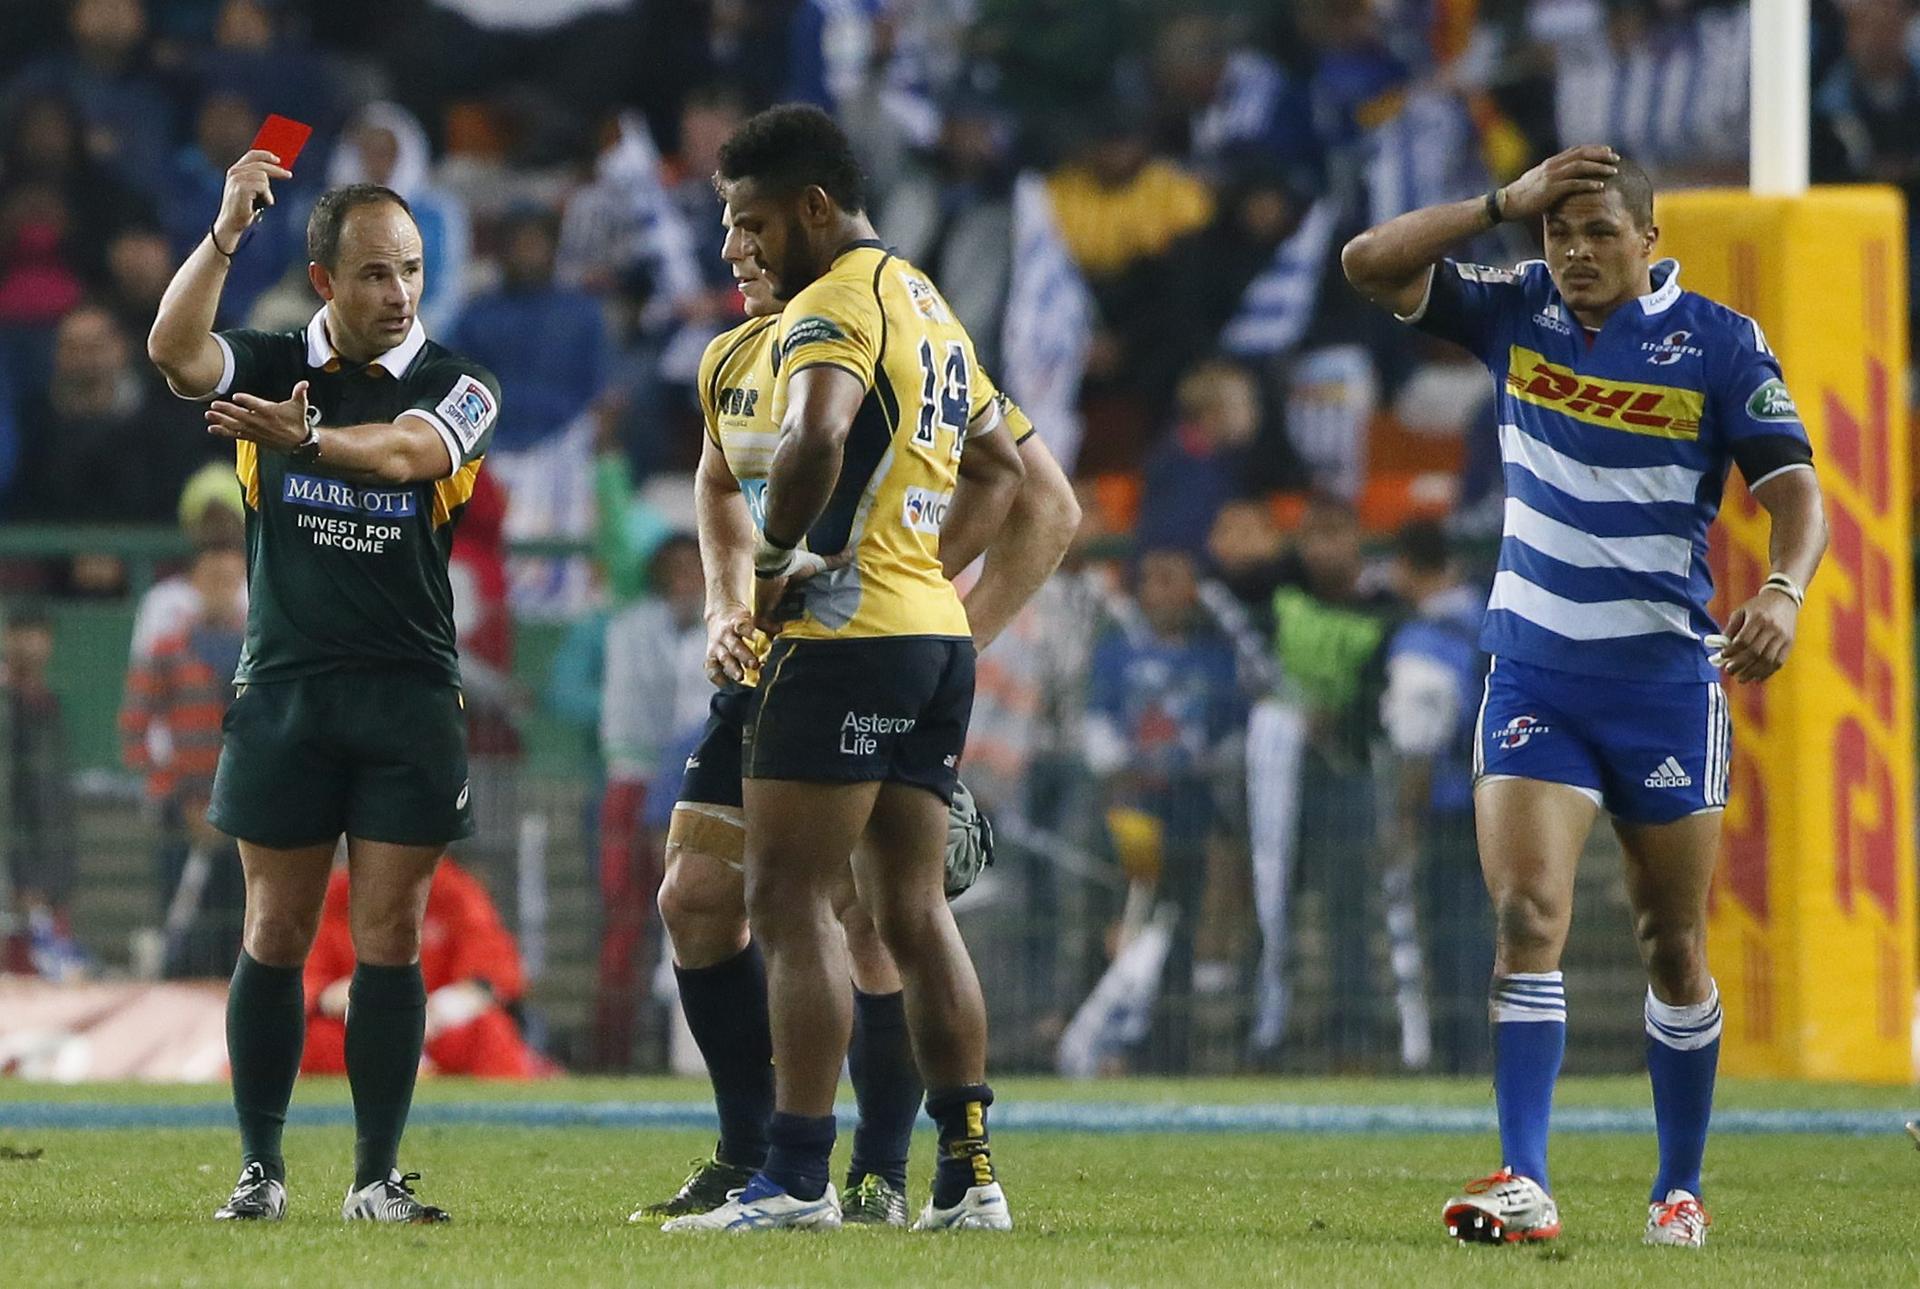 Brumbies winger Henry Speight gets his marching orders after lifting the Stormers' Juan de Jongh (right) head-first into the ground during their clash in Cape Town. Photo: EPA